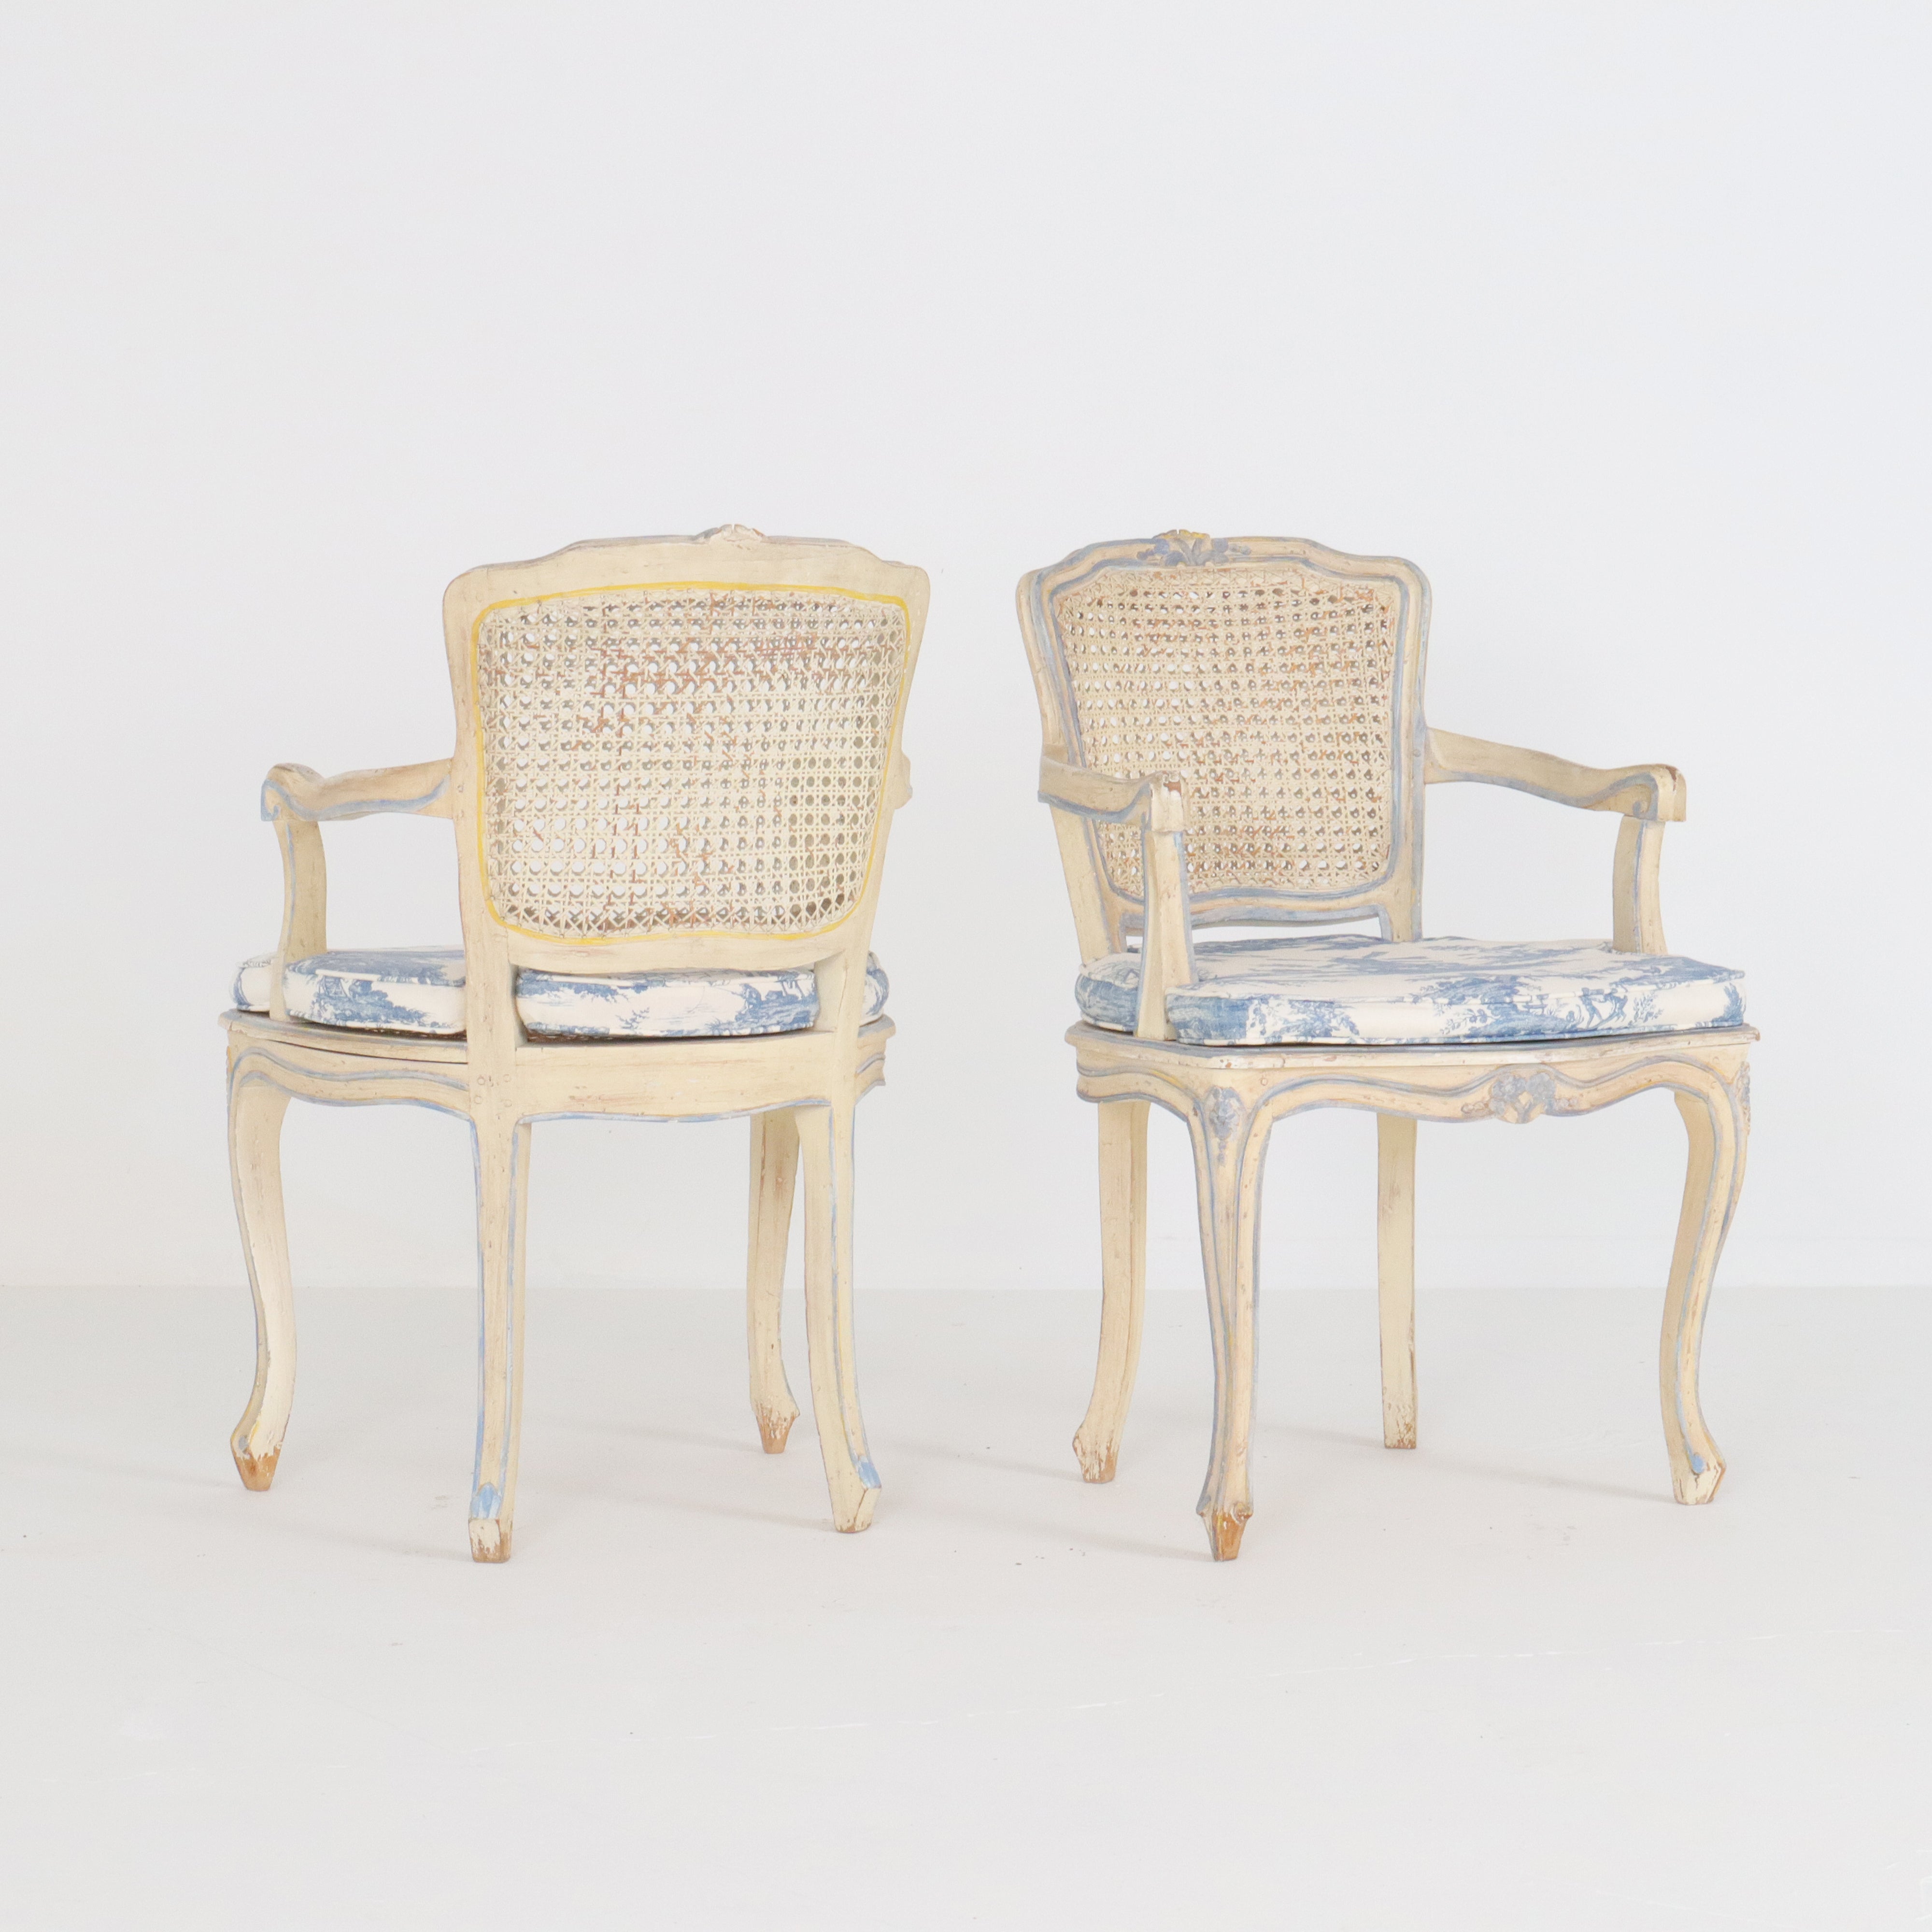 Vintage French Carved Cane Chairs